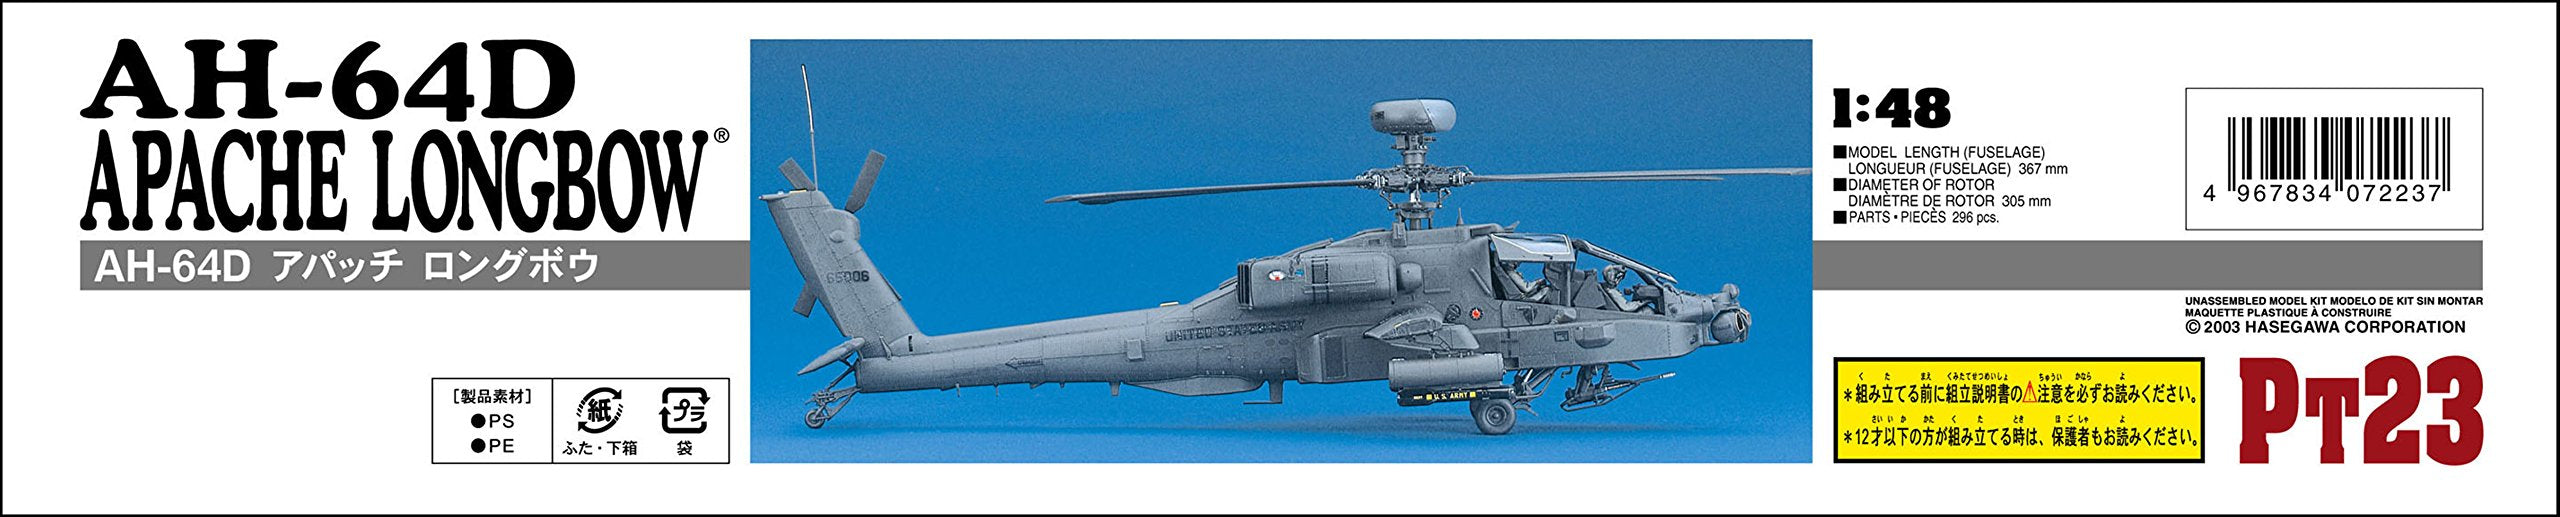 HASEGAWA 1/48 Ah-64D Apache Longbow U.S. Army Attack Helicopter Plastic Model